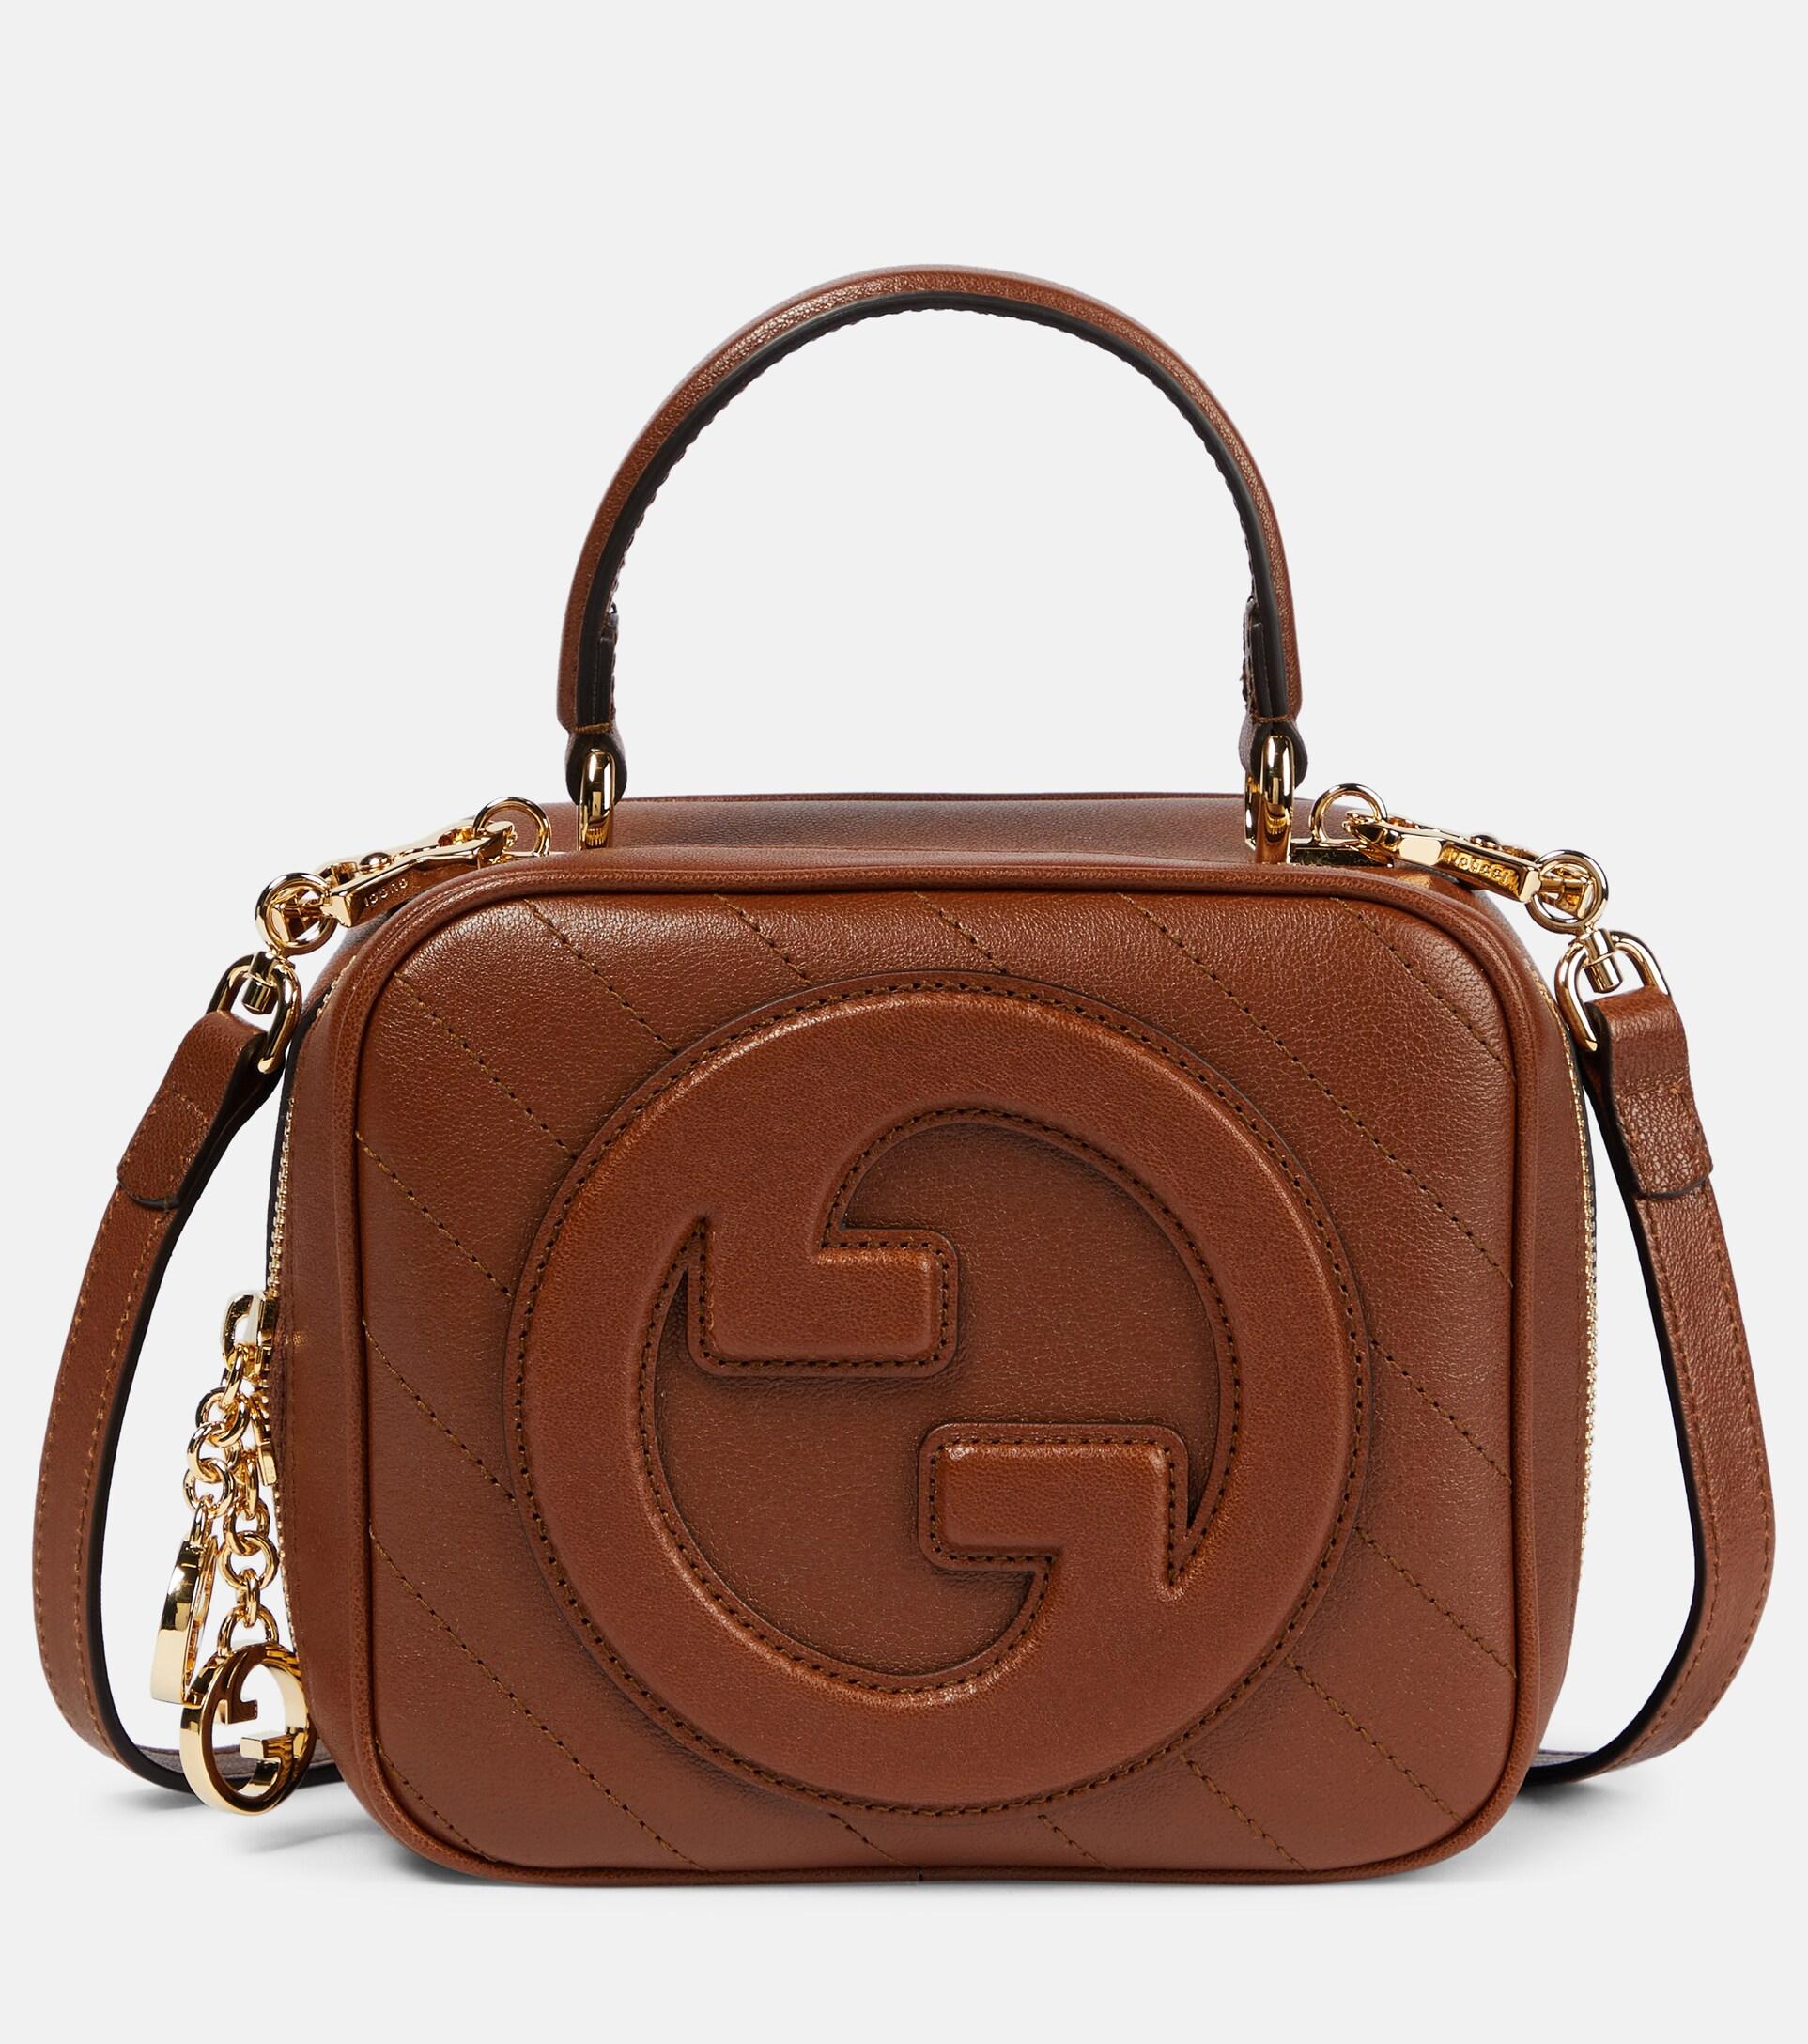 Gucci Blondie Small Leather Shoulder Bag in Brown | Lyst